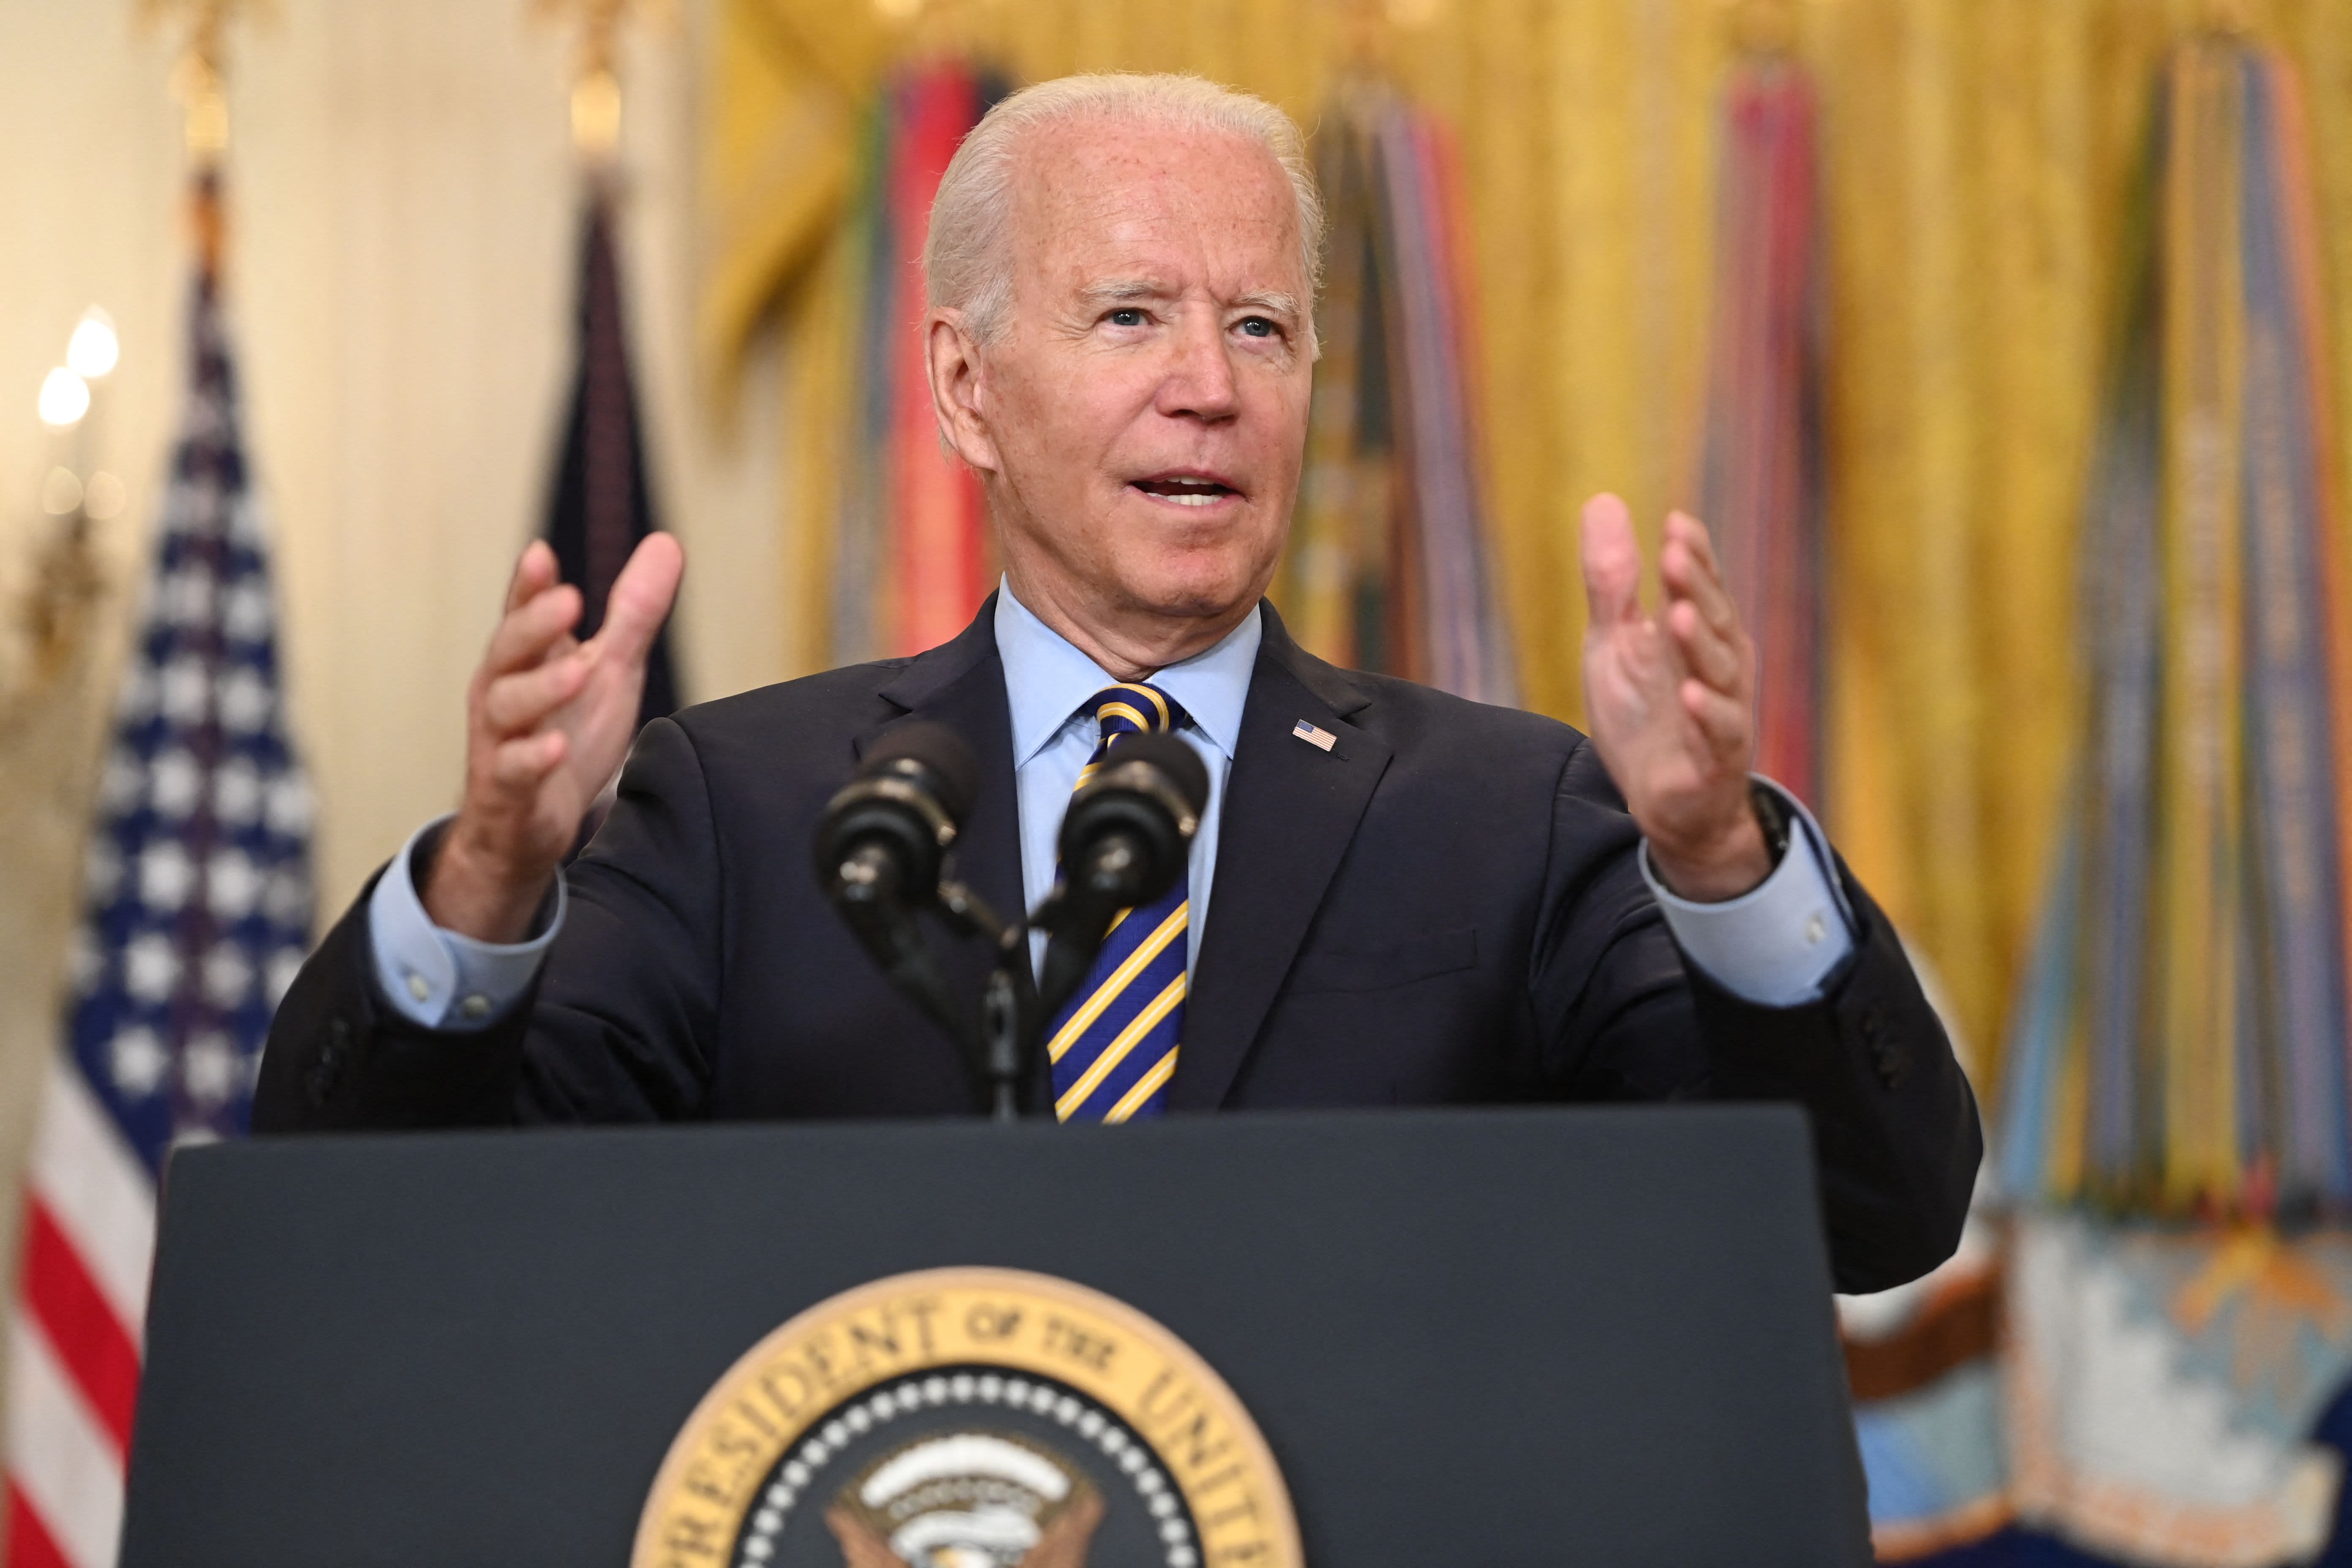 Biden signs order to crack down on Big Tech, boost competition ‘across the board’